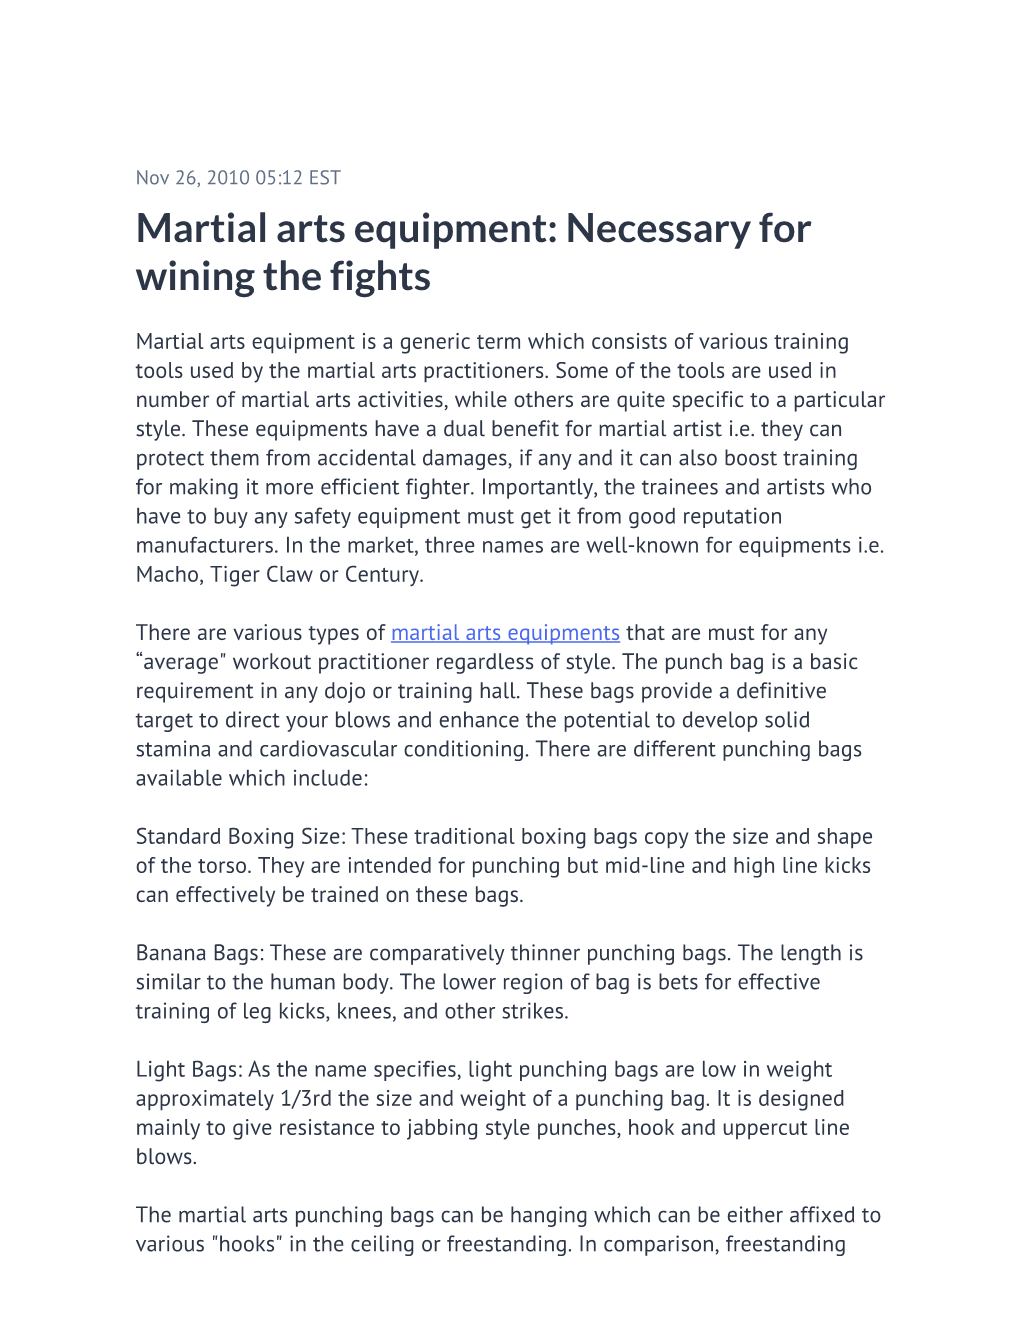 Martial Arts Equipment: Necessary for Wining the Fights